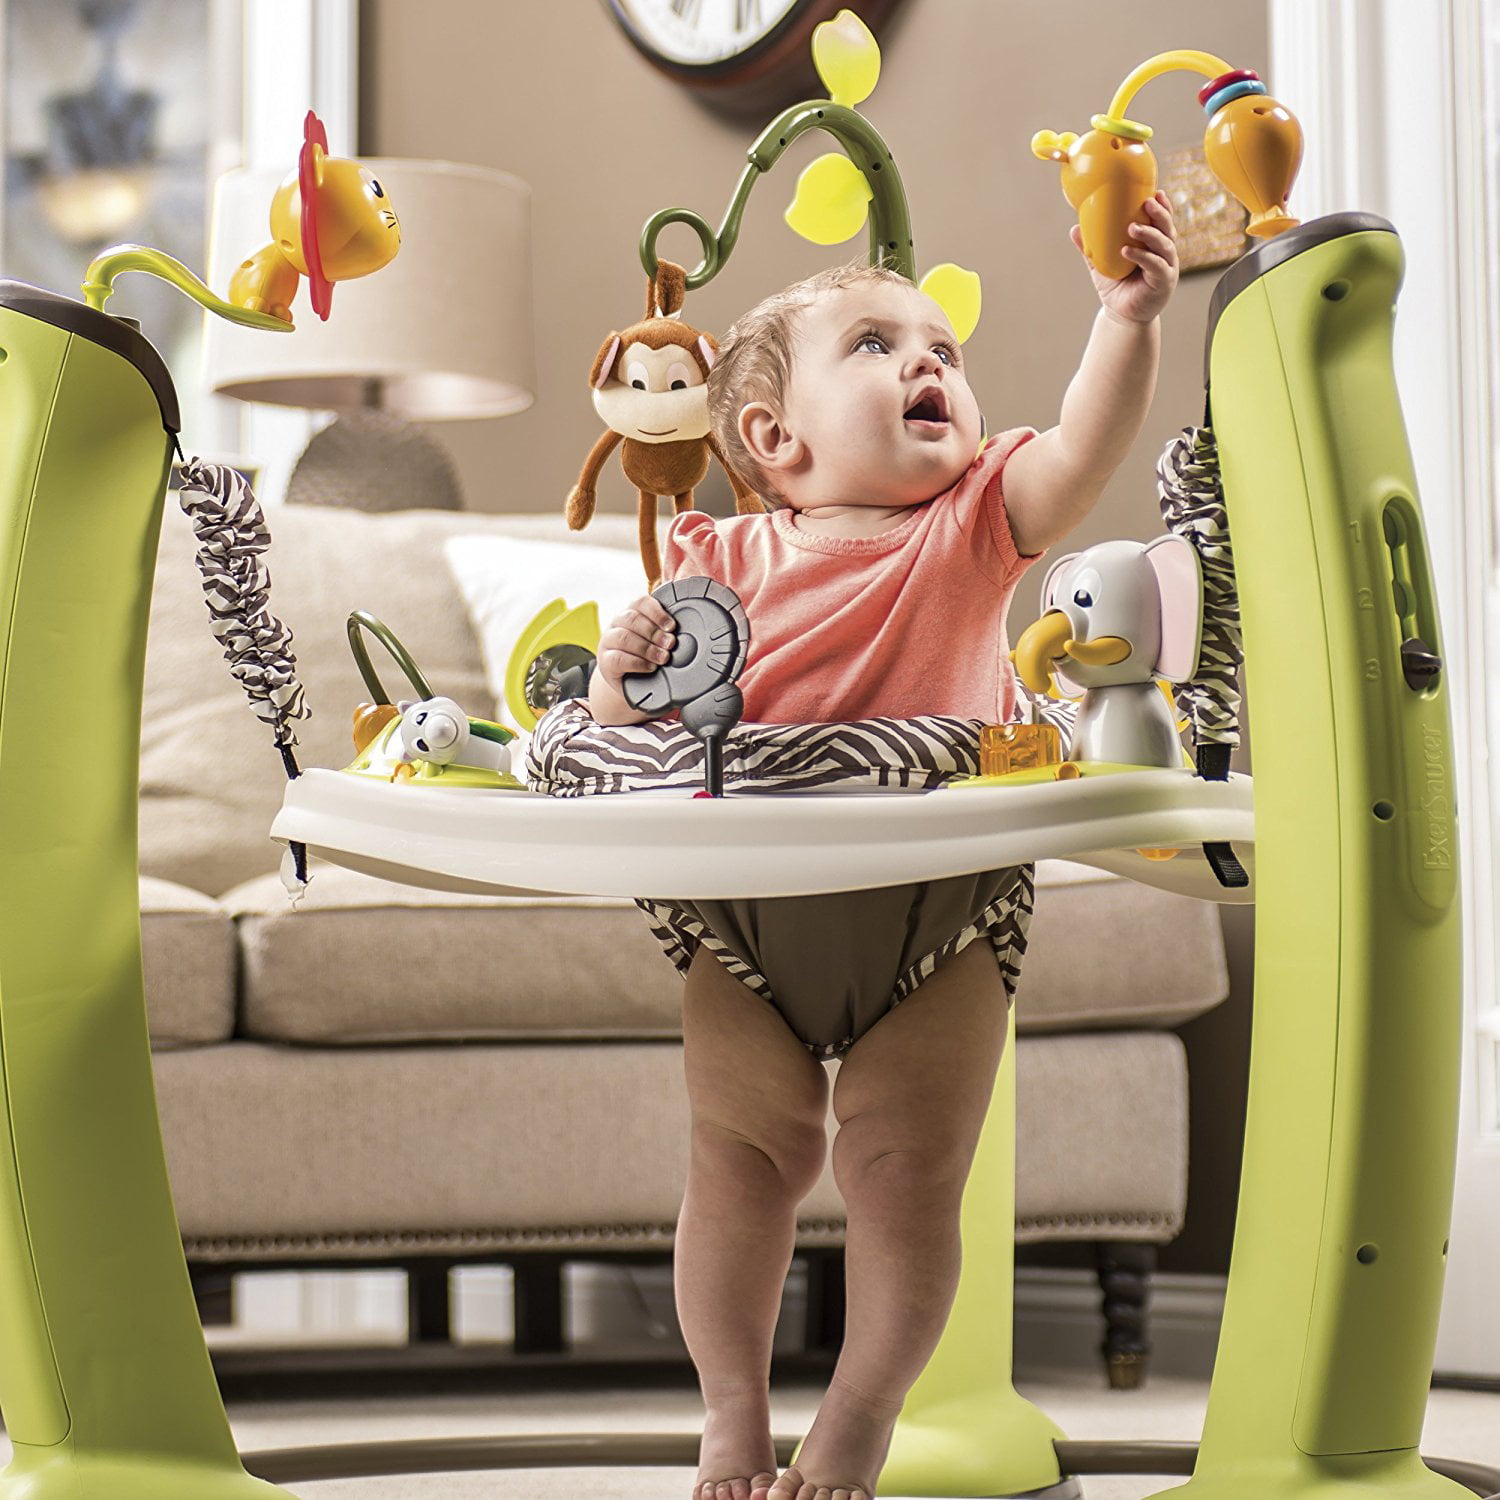 evenflo exersaucer jump and learn